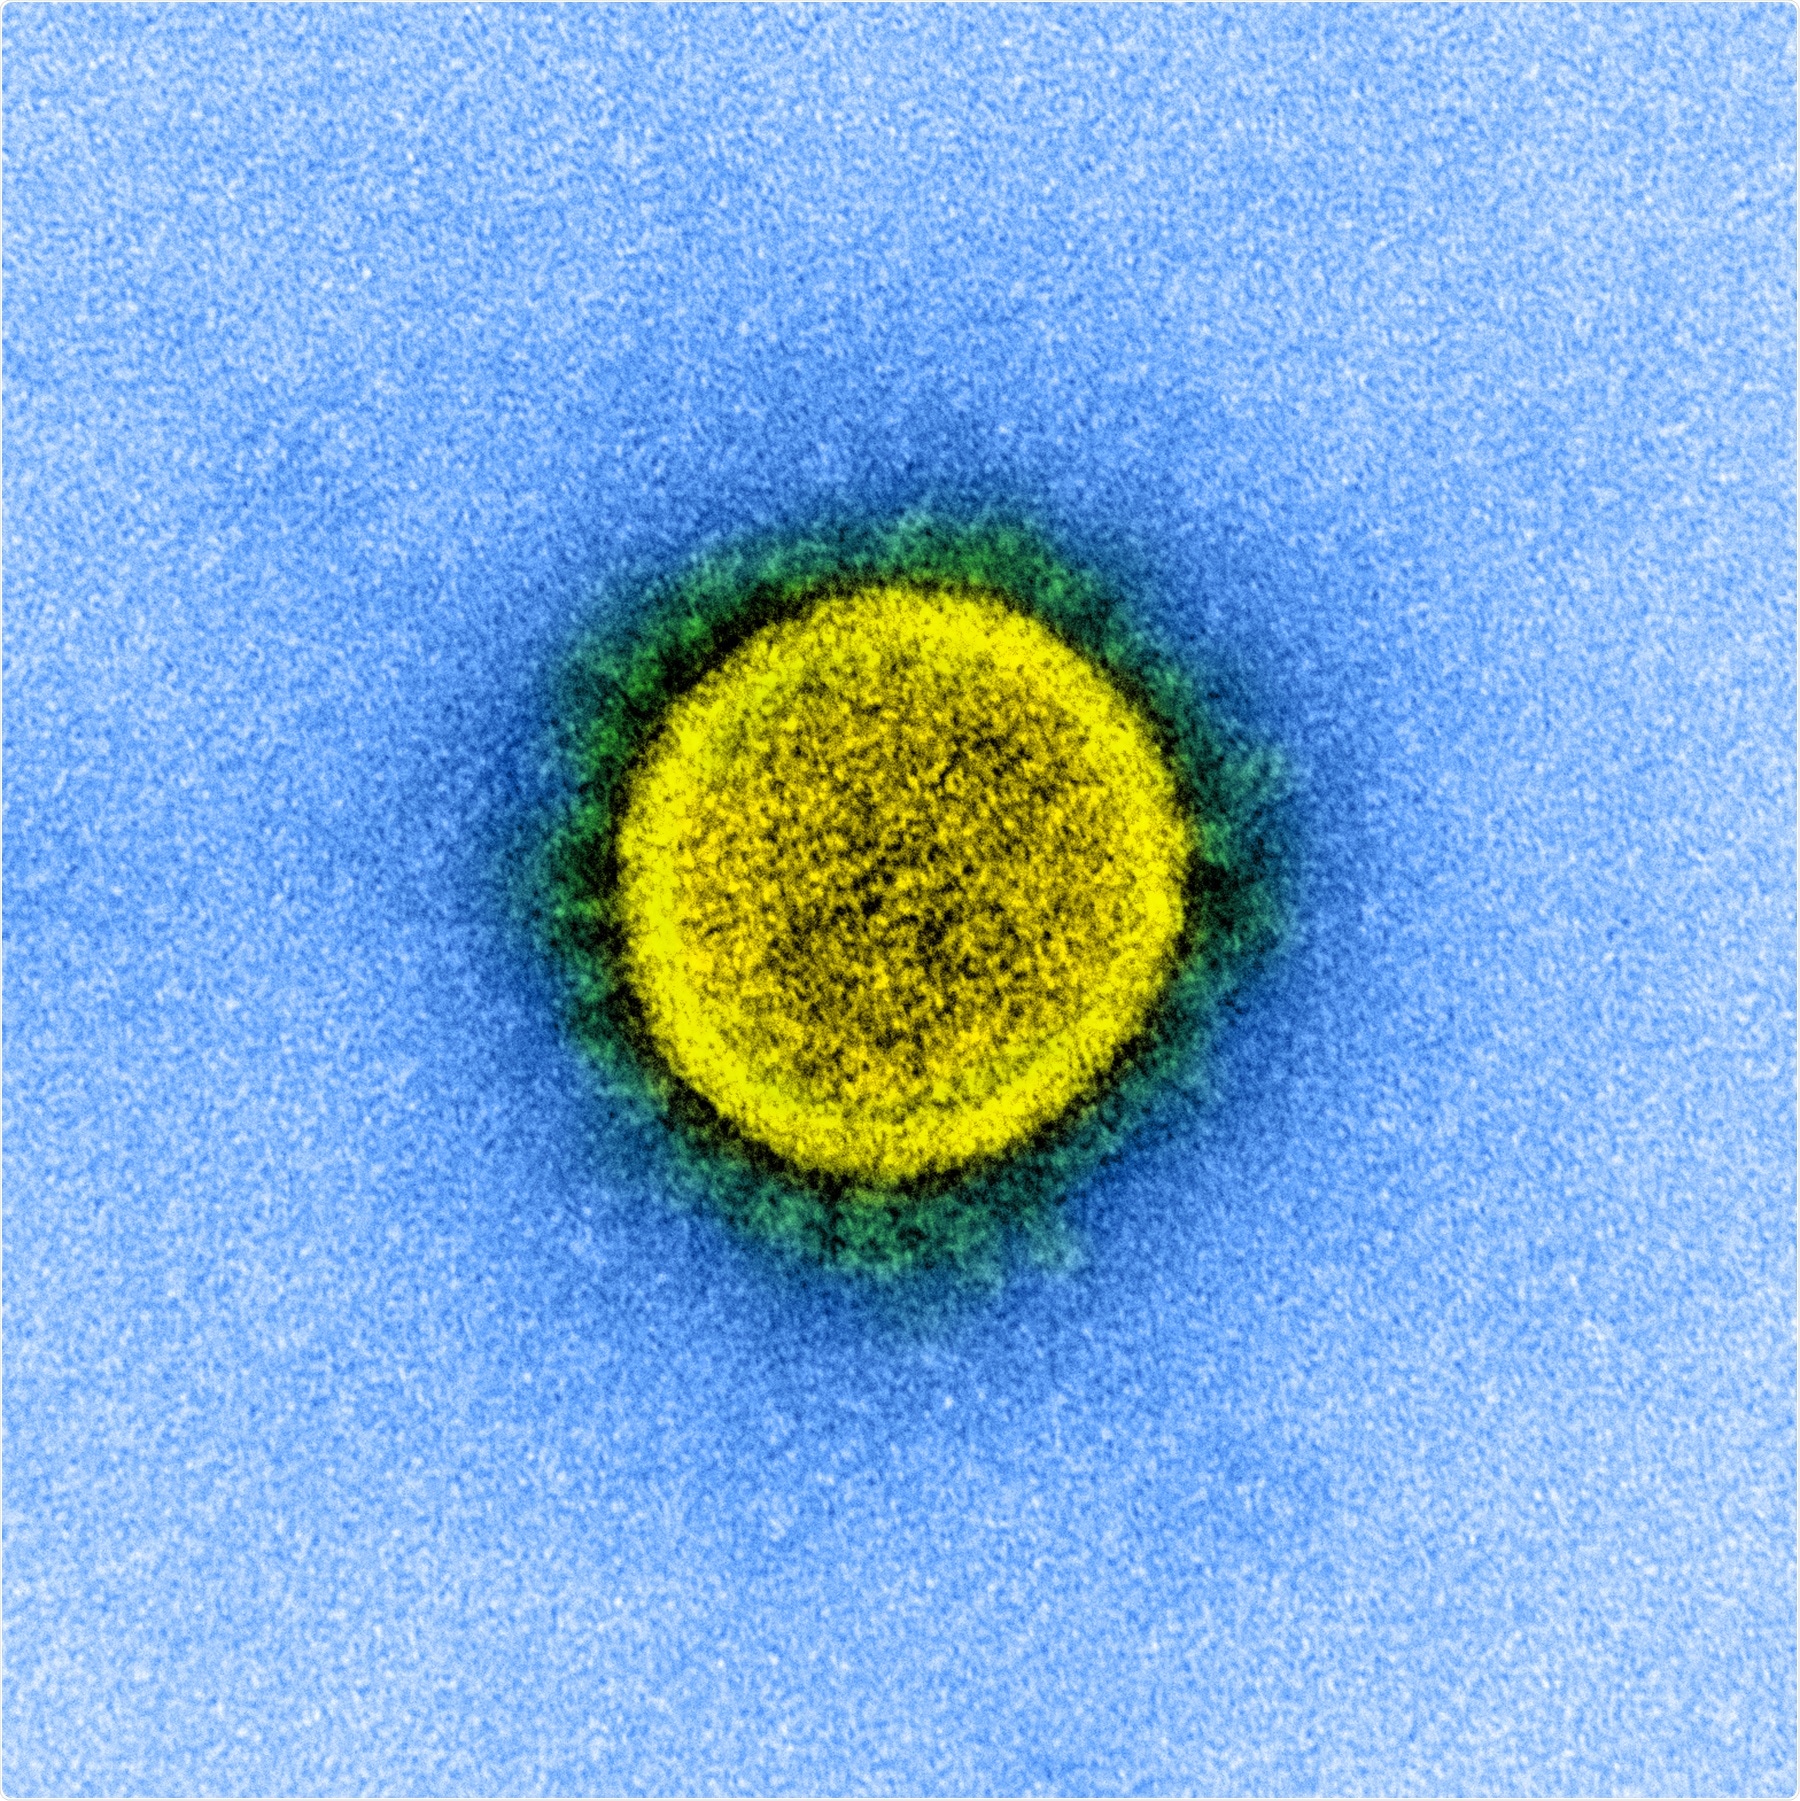 Novel Coronavirus SARS-CoV-2 Transmission electron micrograph of a SARS-CoV-2 virus particle, isolated from a patient. Image captured and color-enhanced at the NIAID Integrated Research Facility (IRF) in Fort Detrick, Maryland. Credit: NIAID